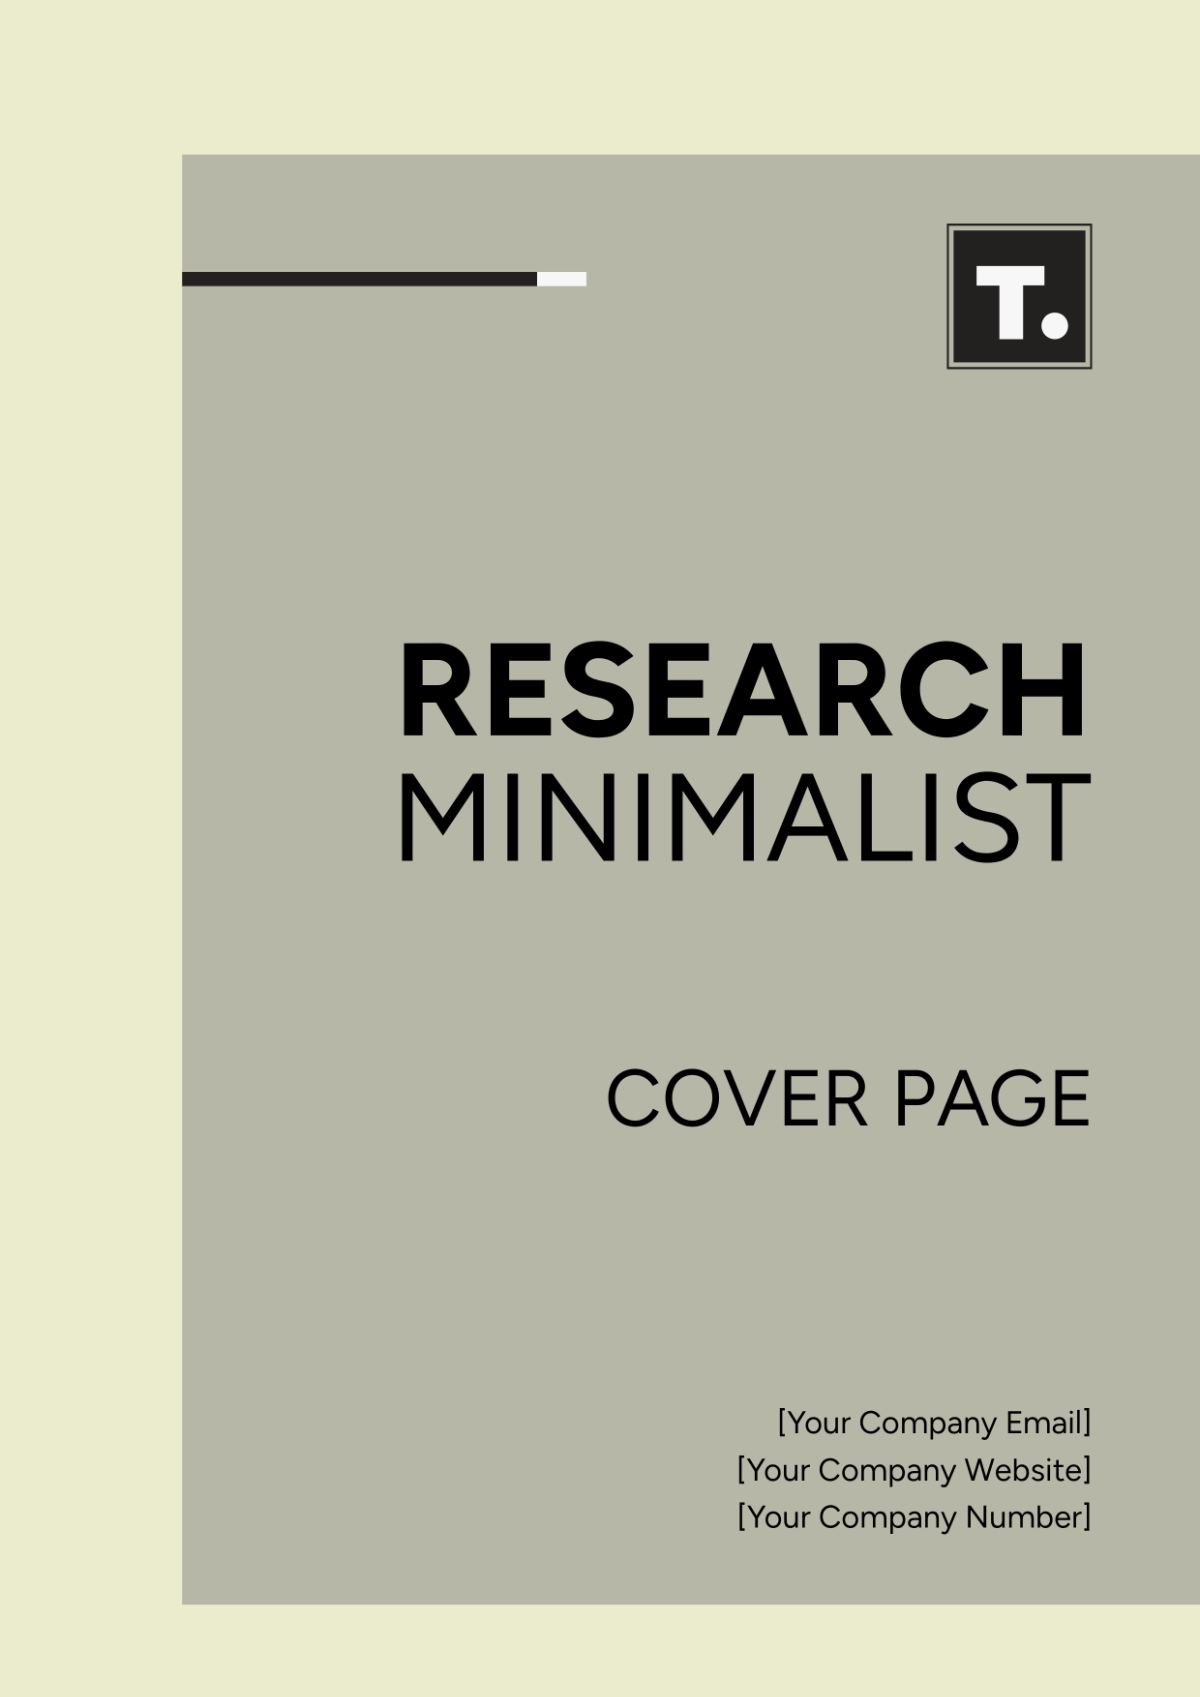 Research Minimalist Cover Page